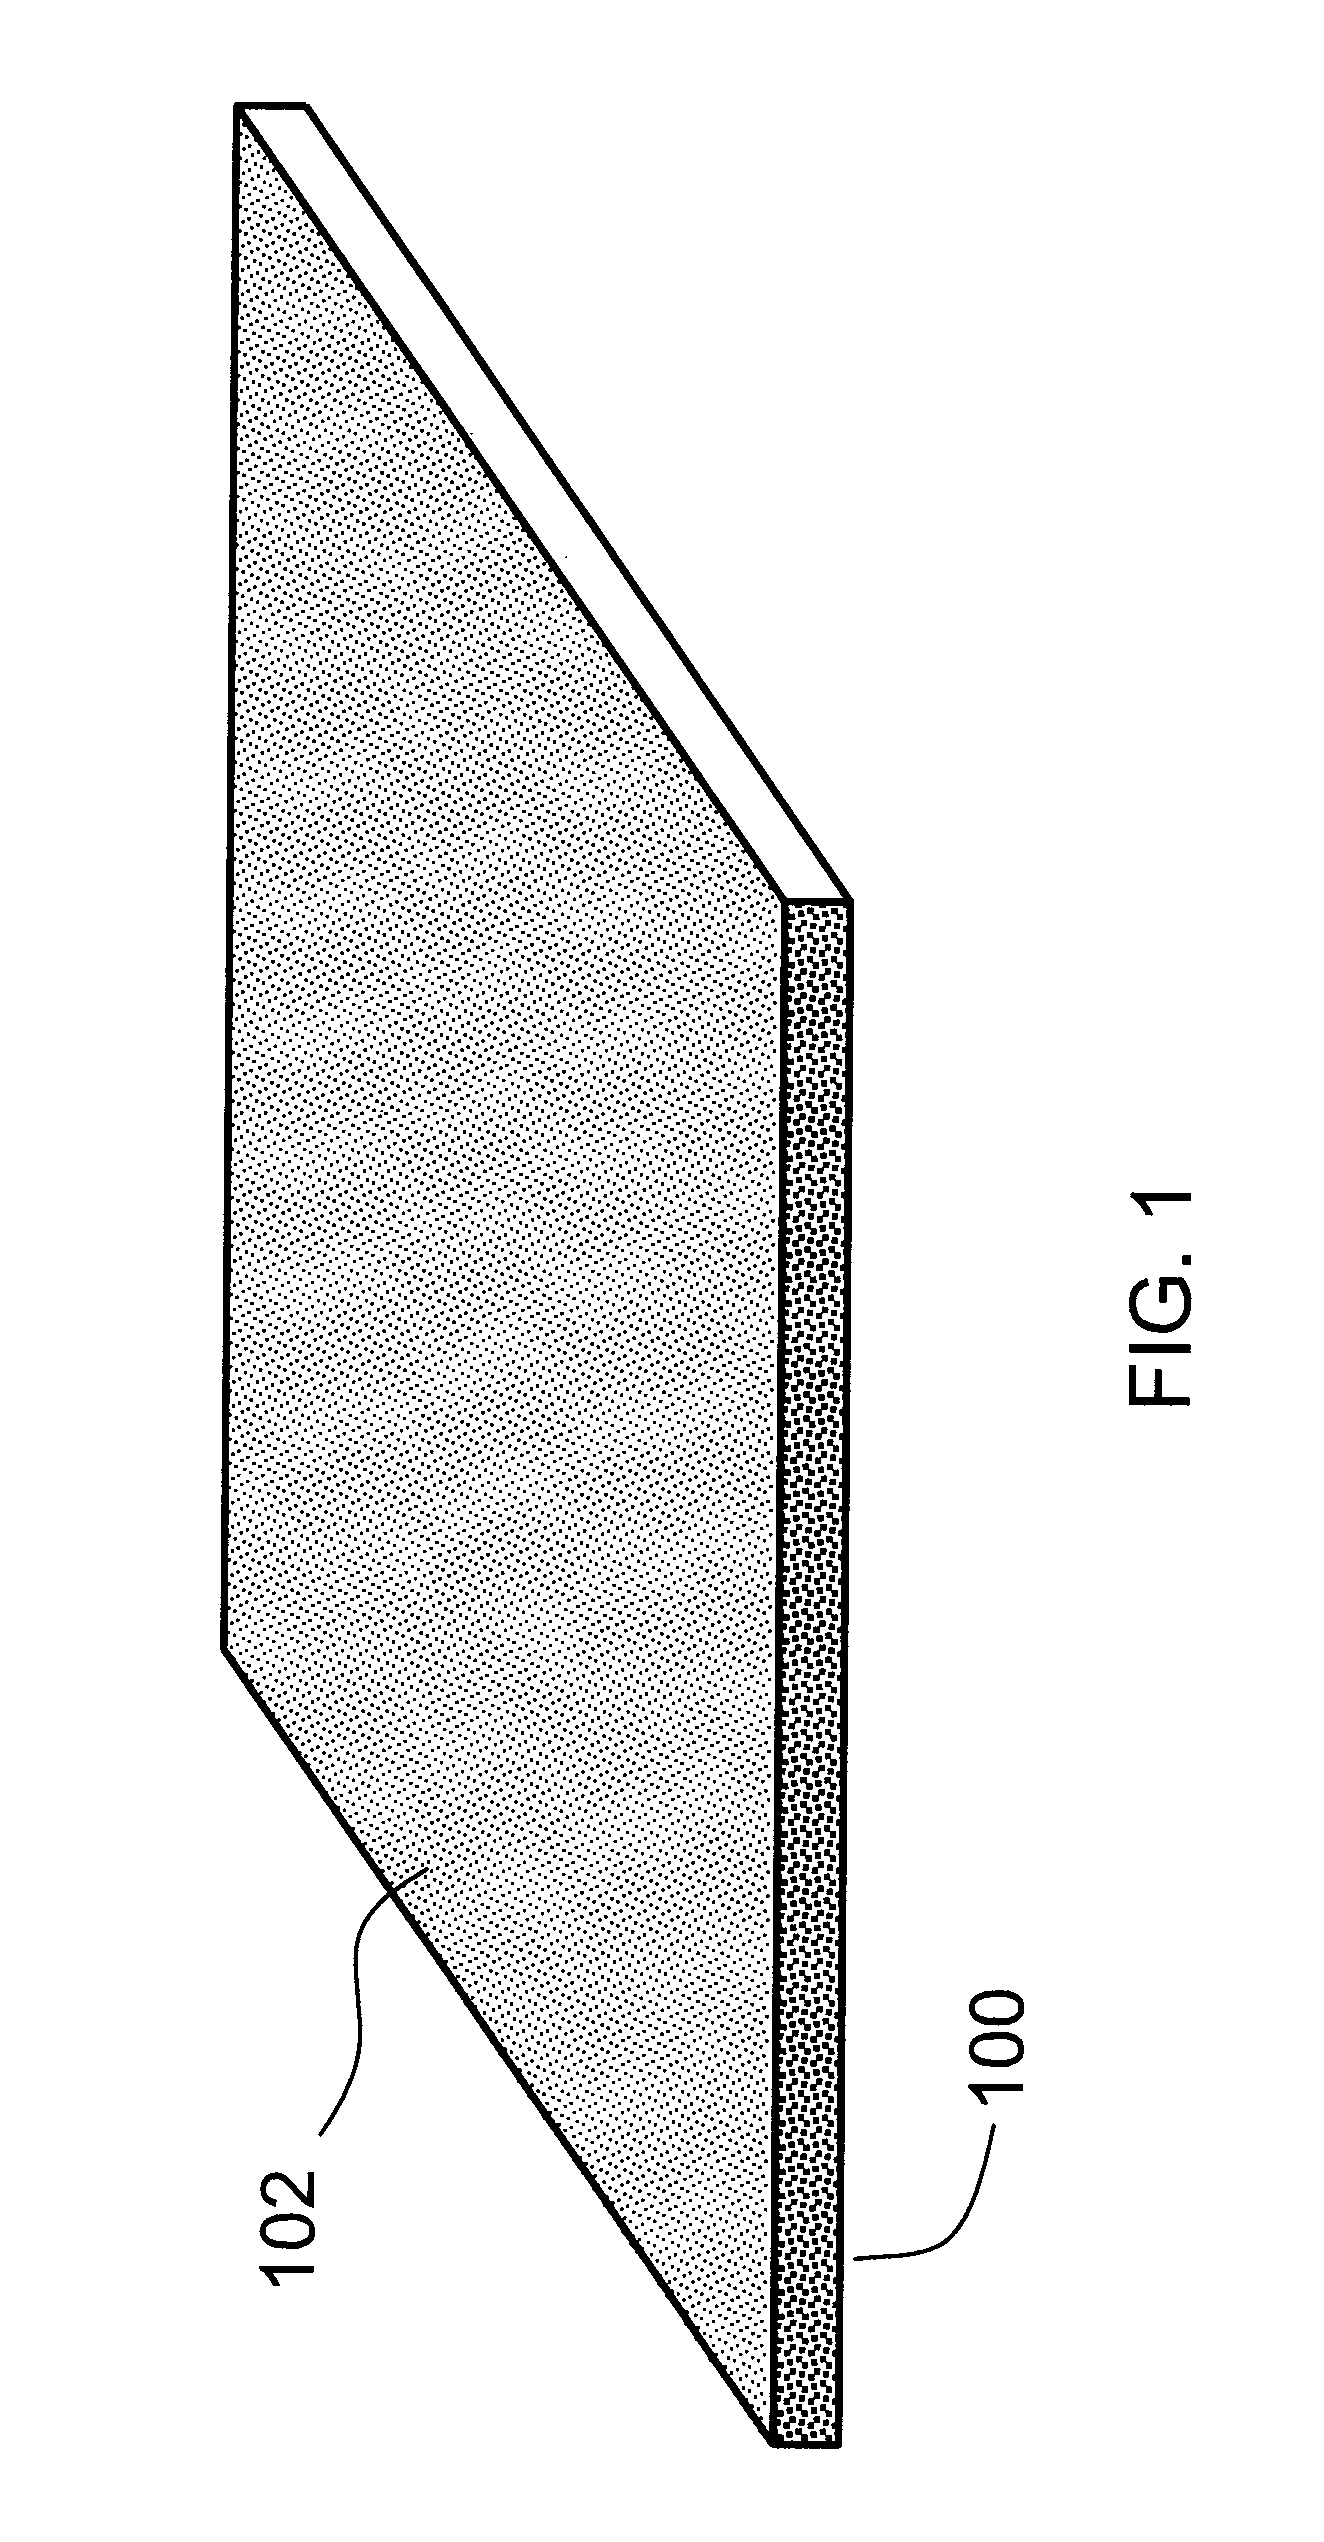 Low embodied energy sheathing panels with optimal water vapor permeance and methods of making same